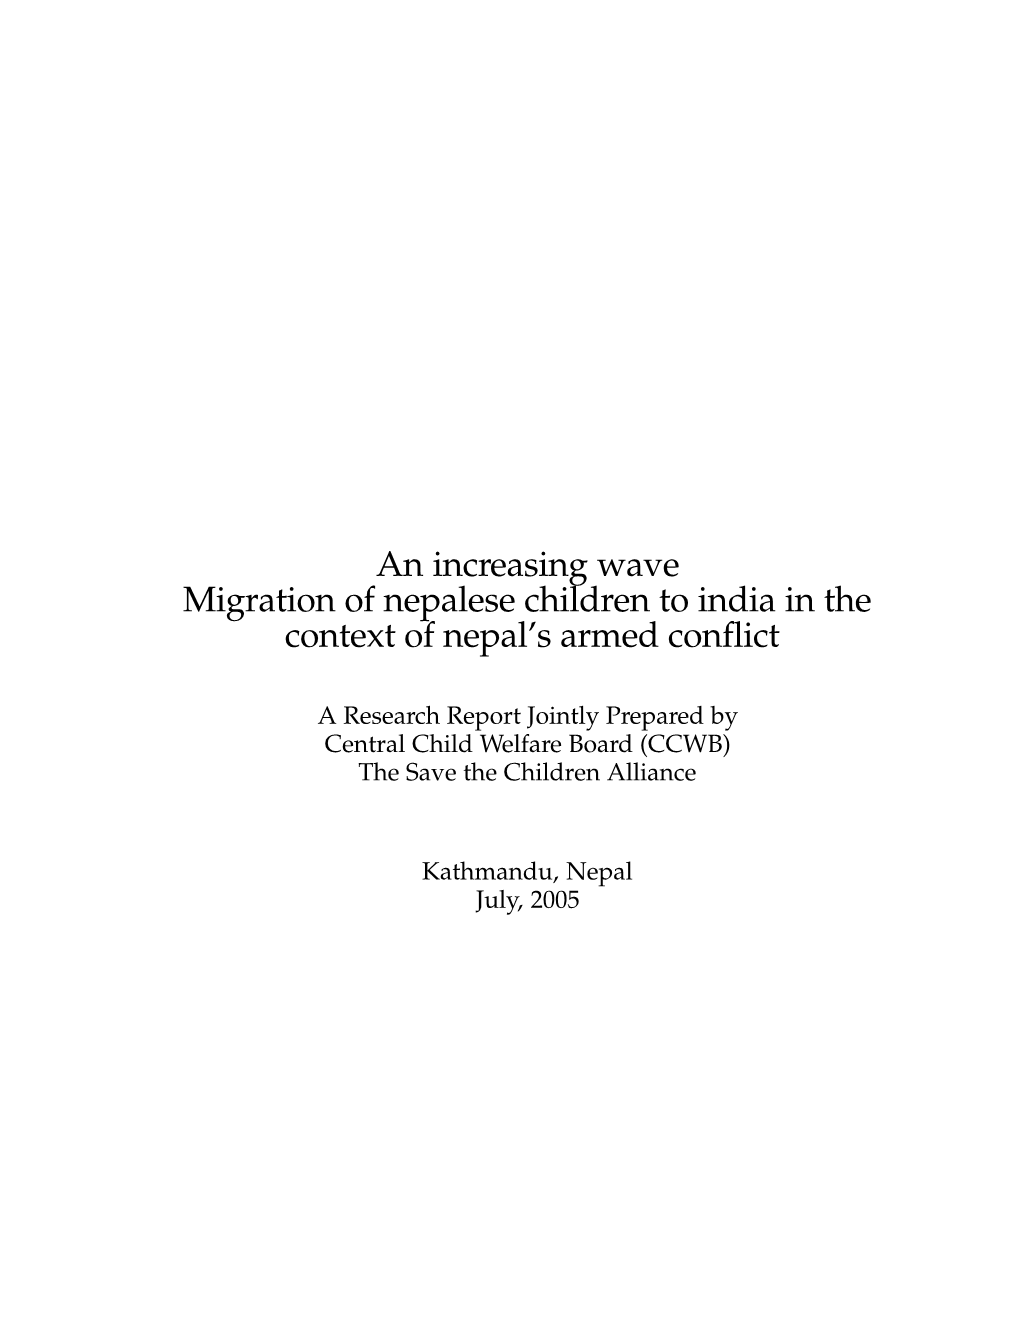 An Increasing Wave Migration of Nepalese Children to India in the Context of Nepal’S Armed Conflict